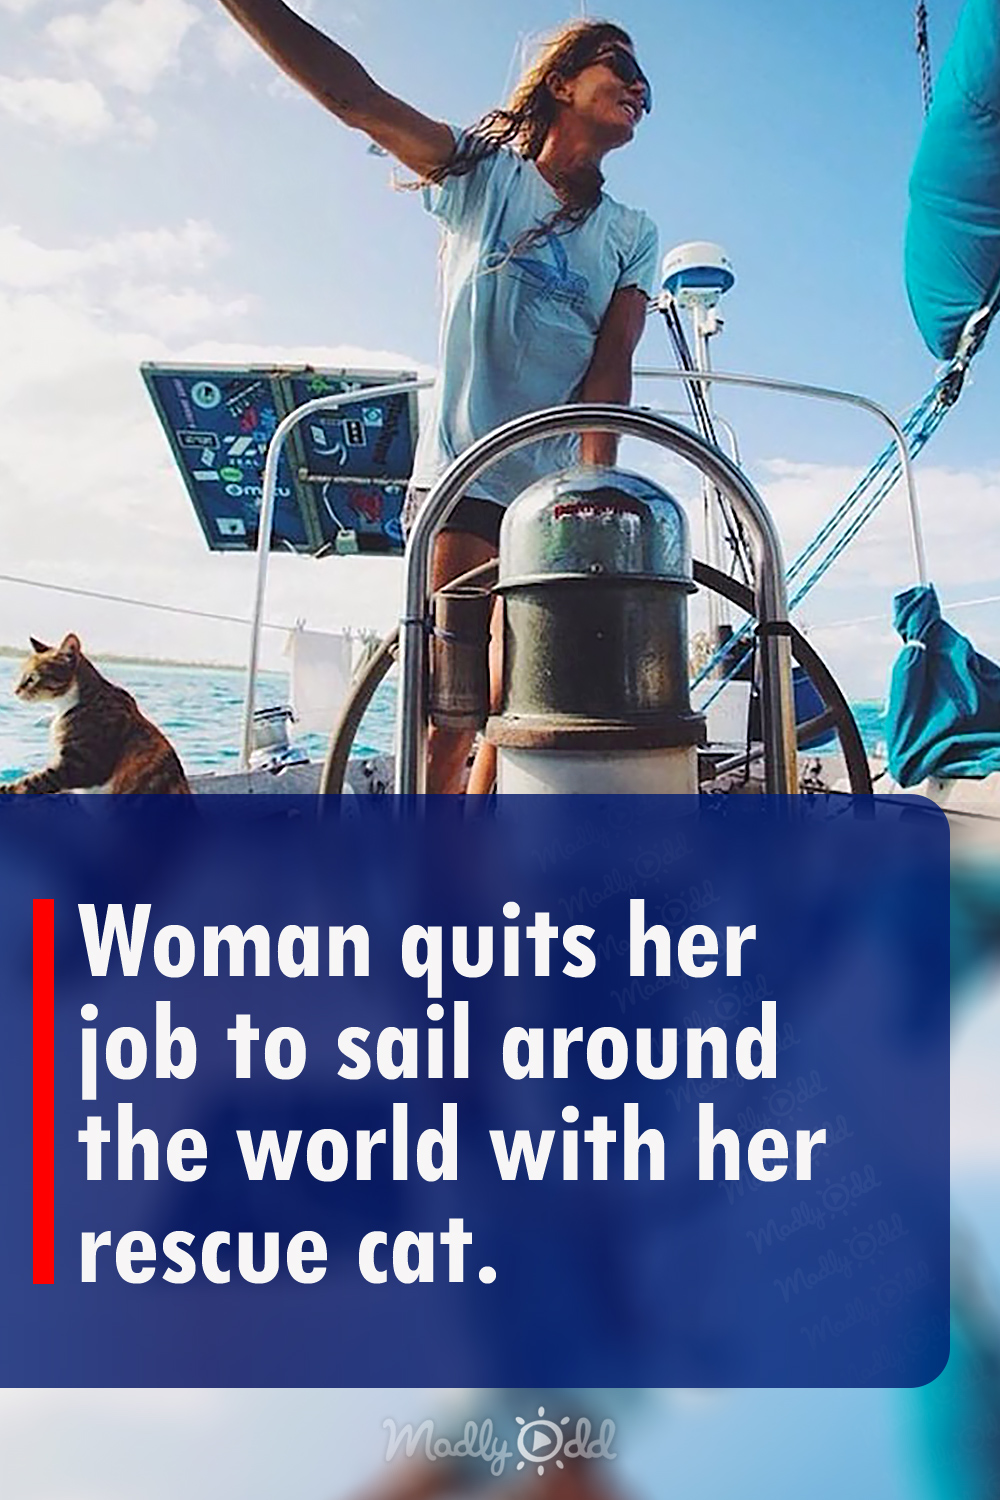 Woman quits her job to sail around the world with her rescue cat.